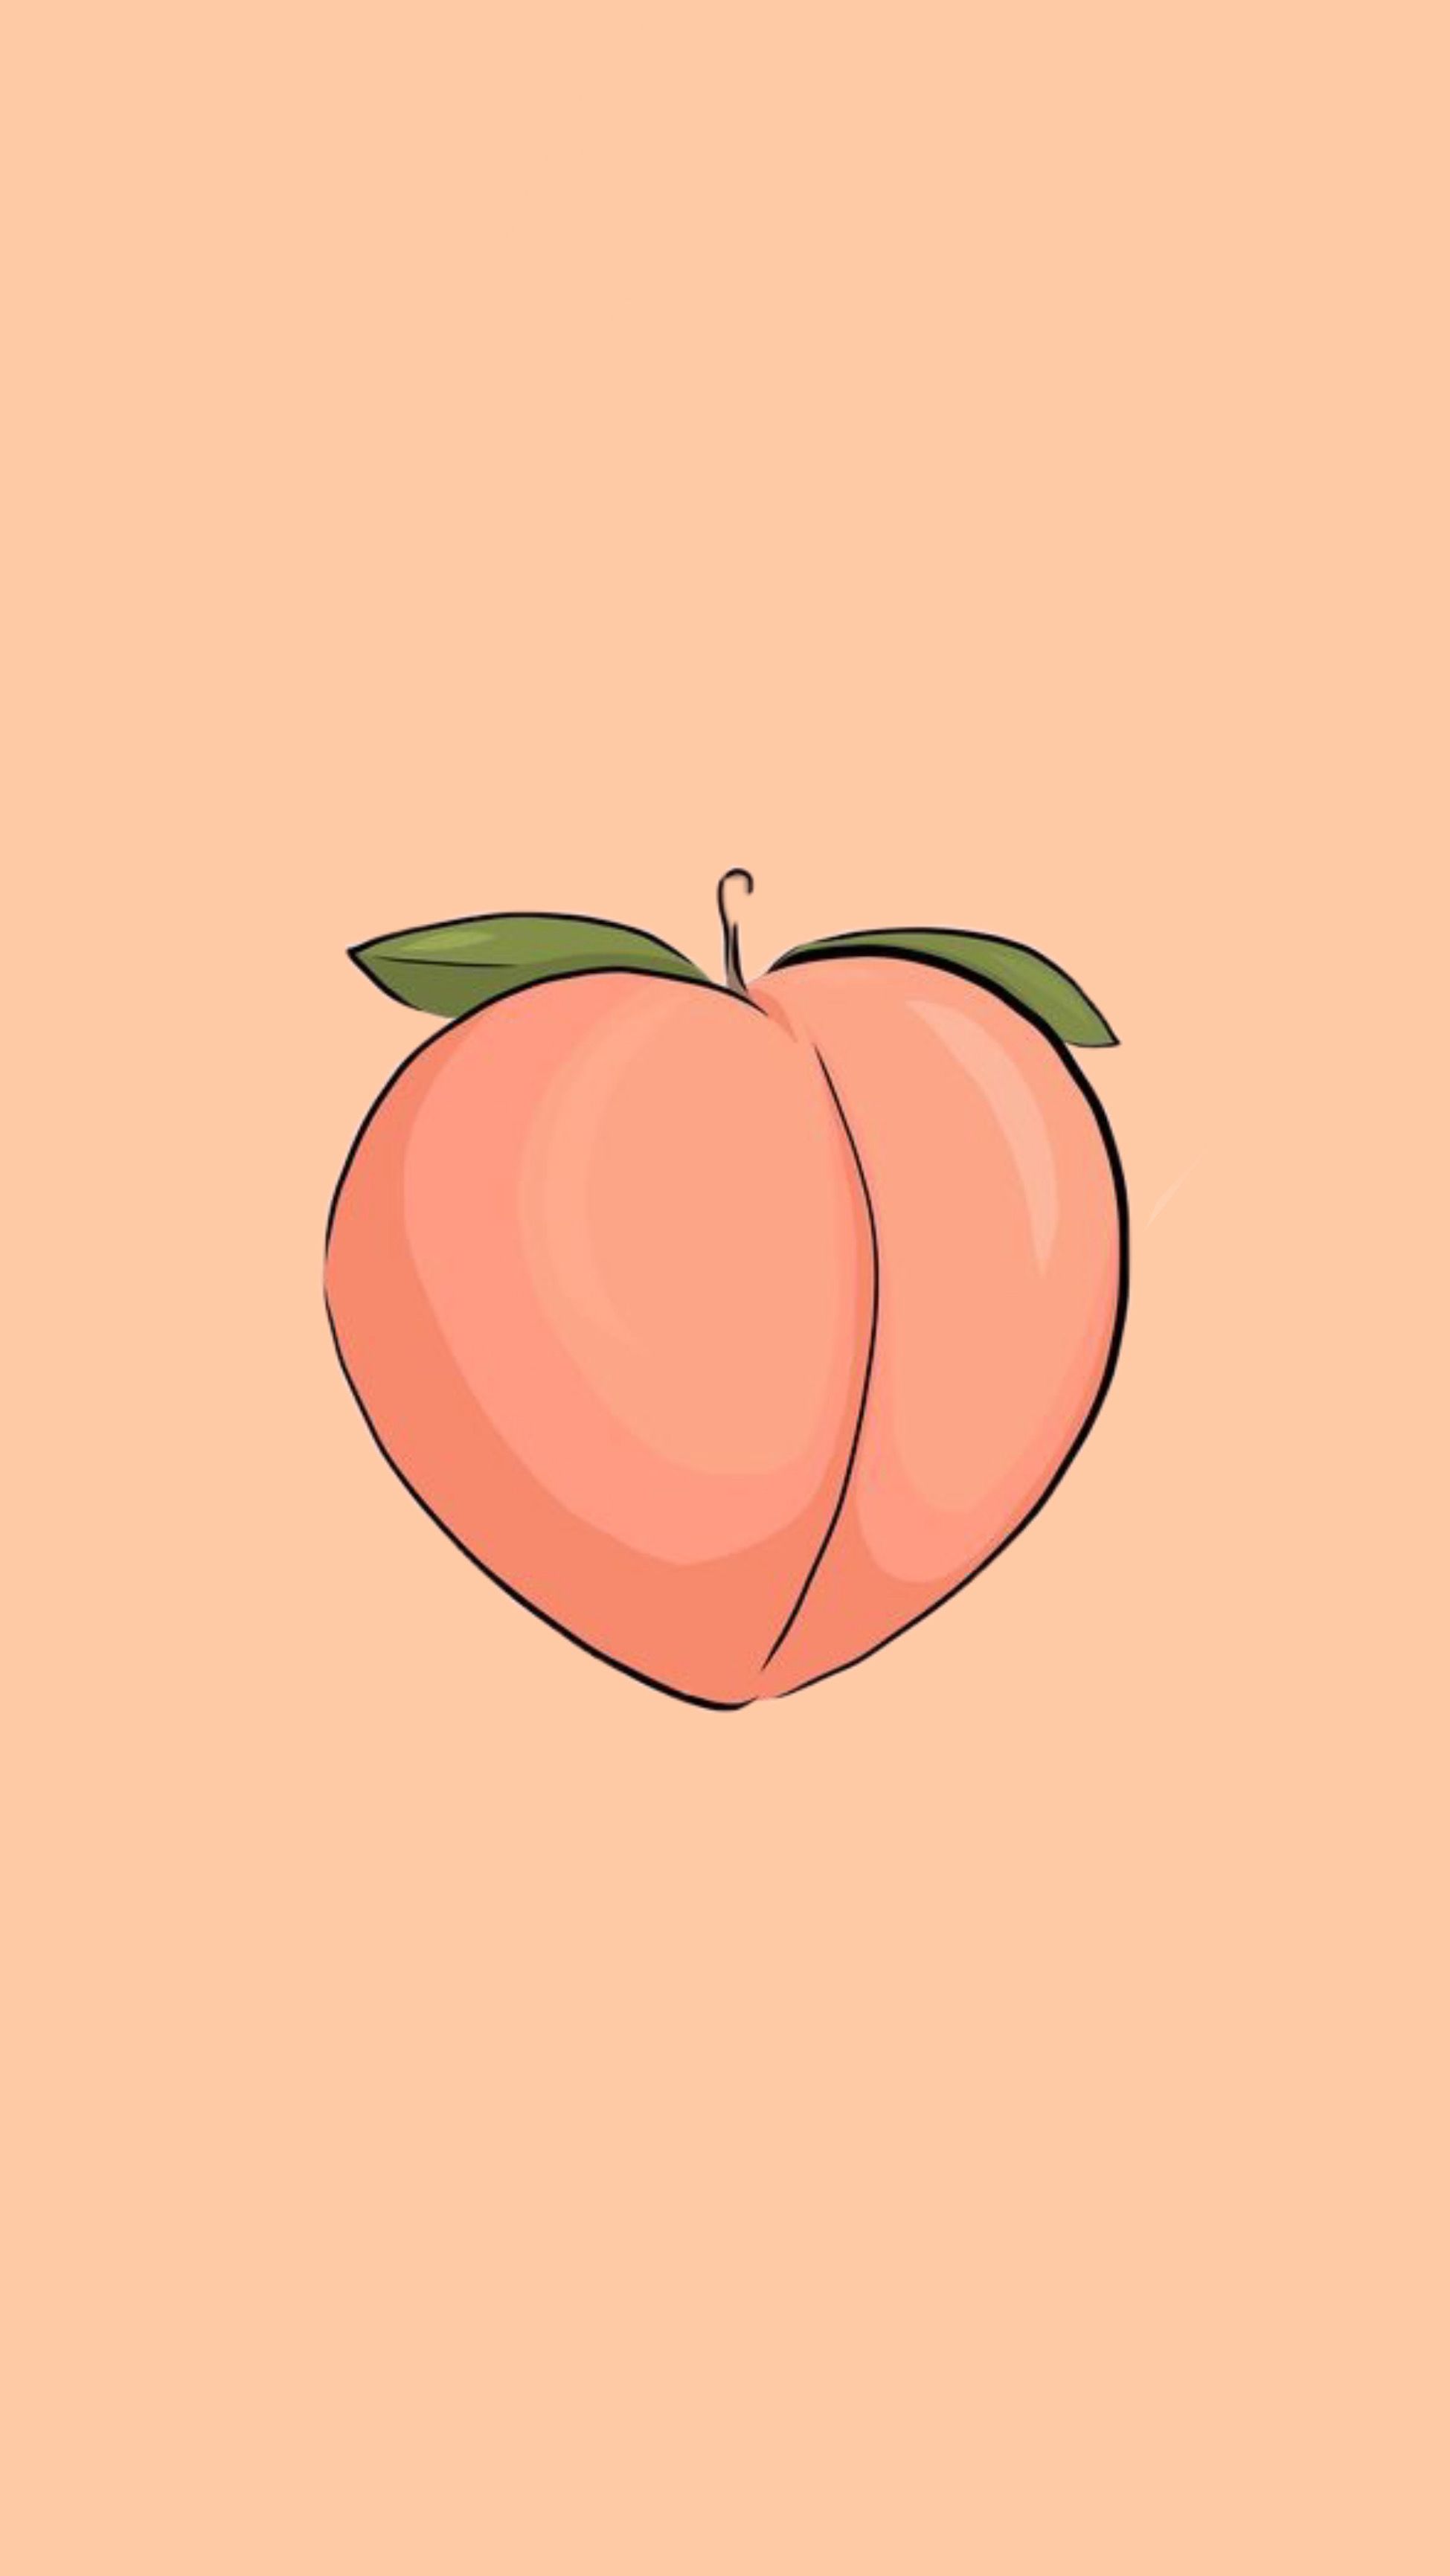 Aesthetic Peach Images Wallpapers